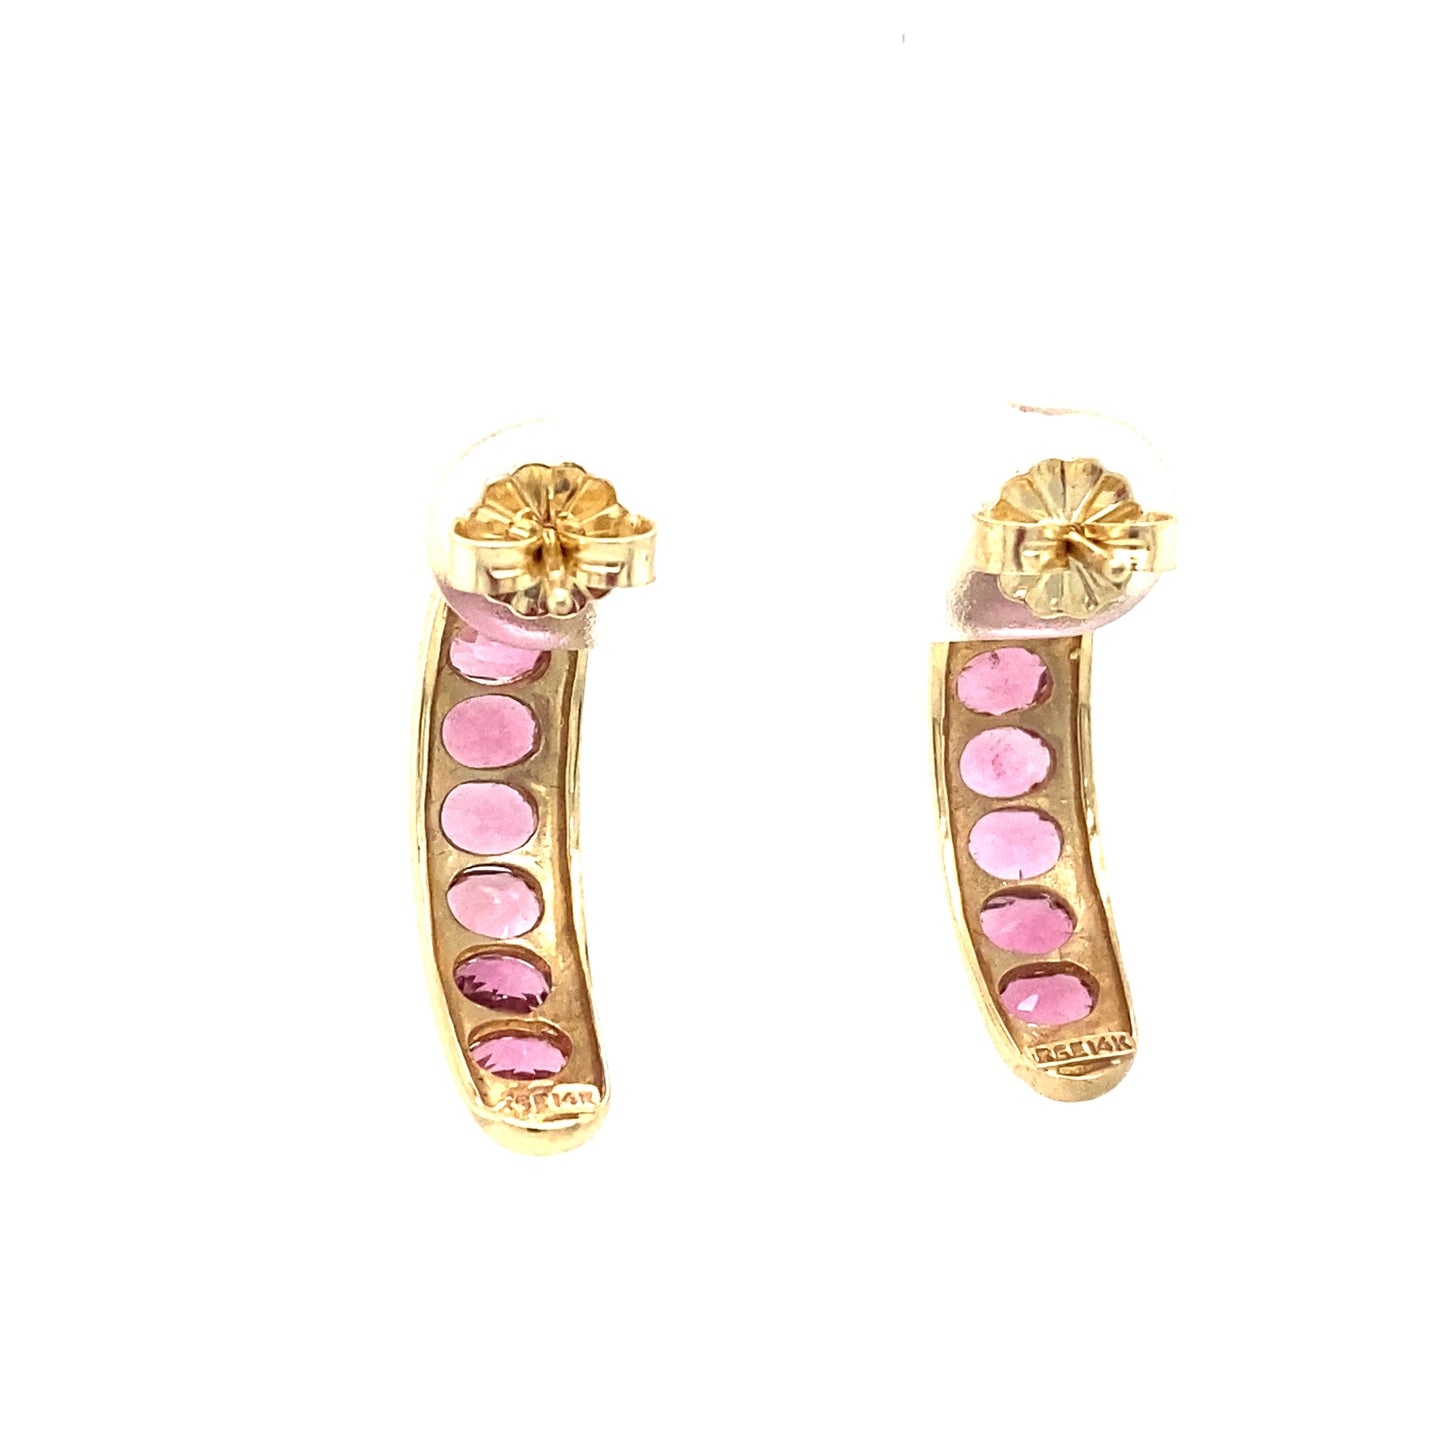 Circa 1990s 2.0ctw Pink Tourmaline Curved Earrings in 14K Gold